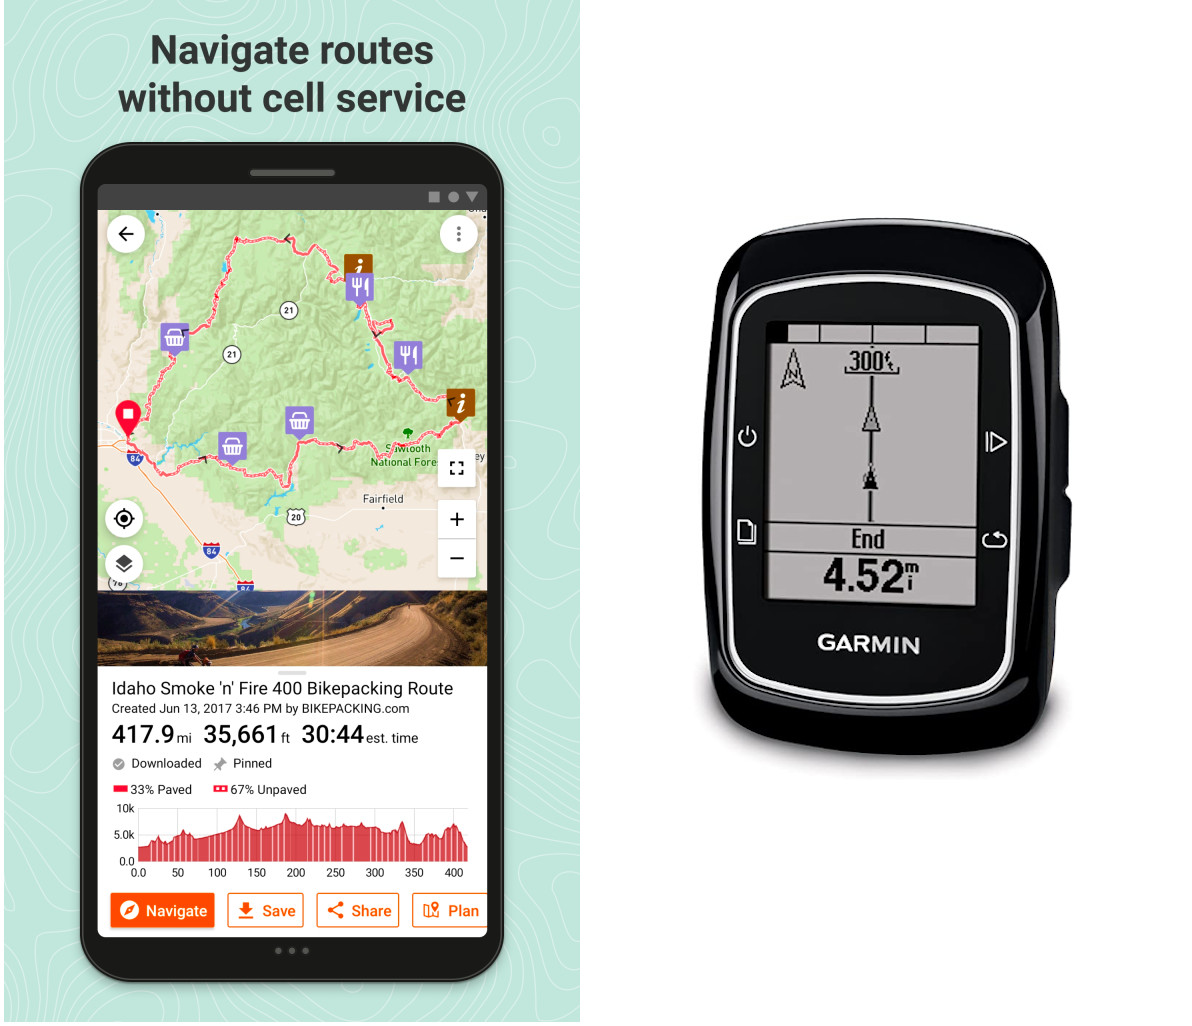 Bike Tour guided by GPS and phone application in Spain